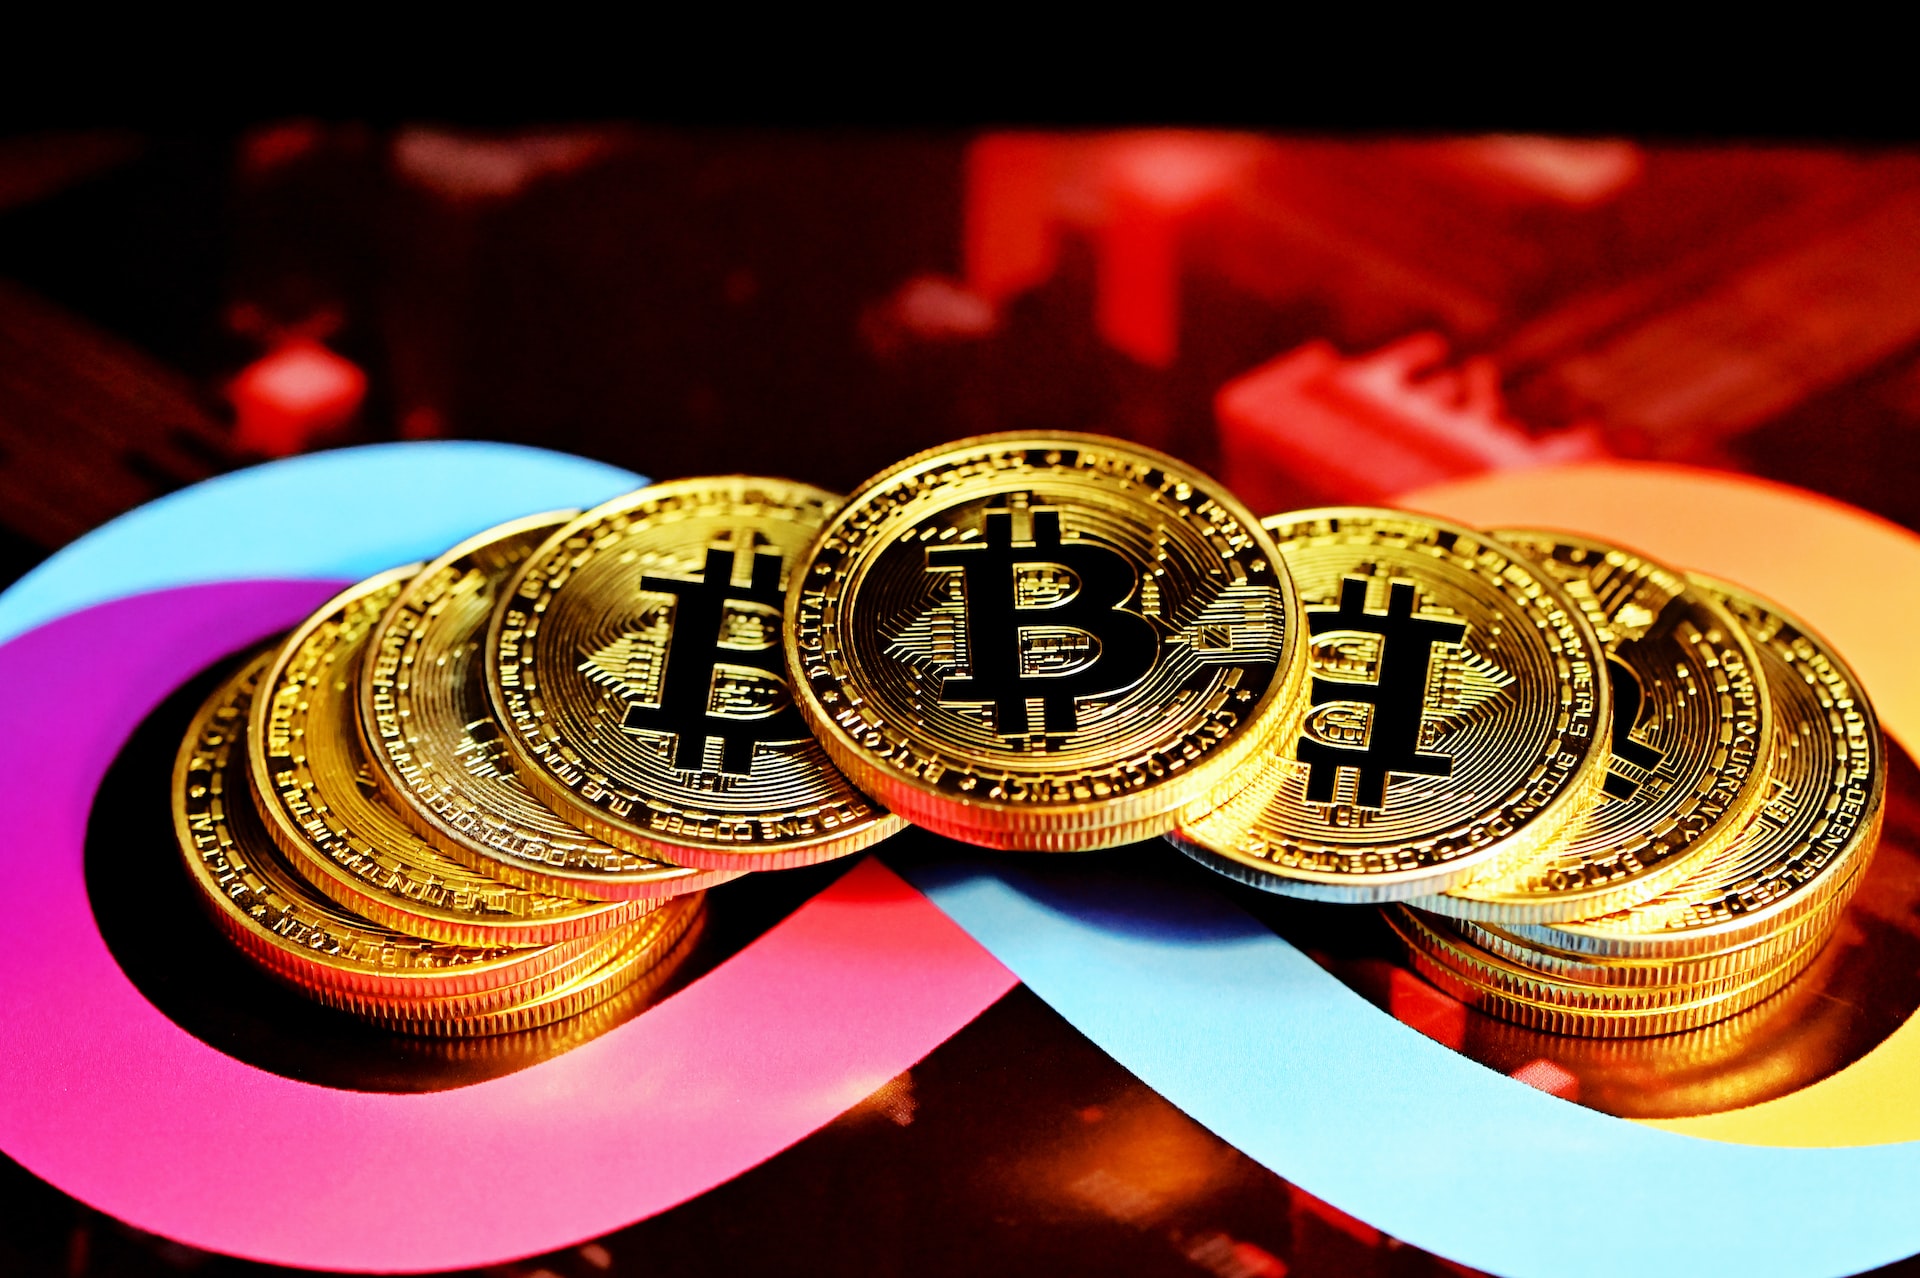 14 pieces of gold bitcoins stacked up within an infinite loop symbol in pink, light blue and yellow